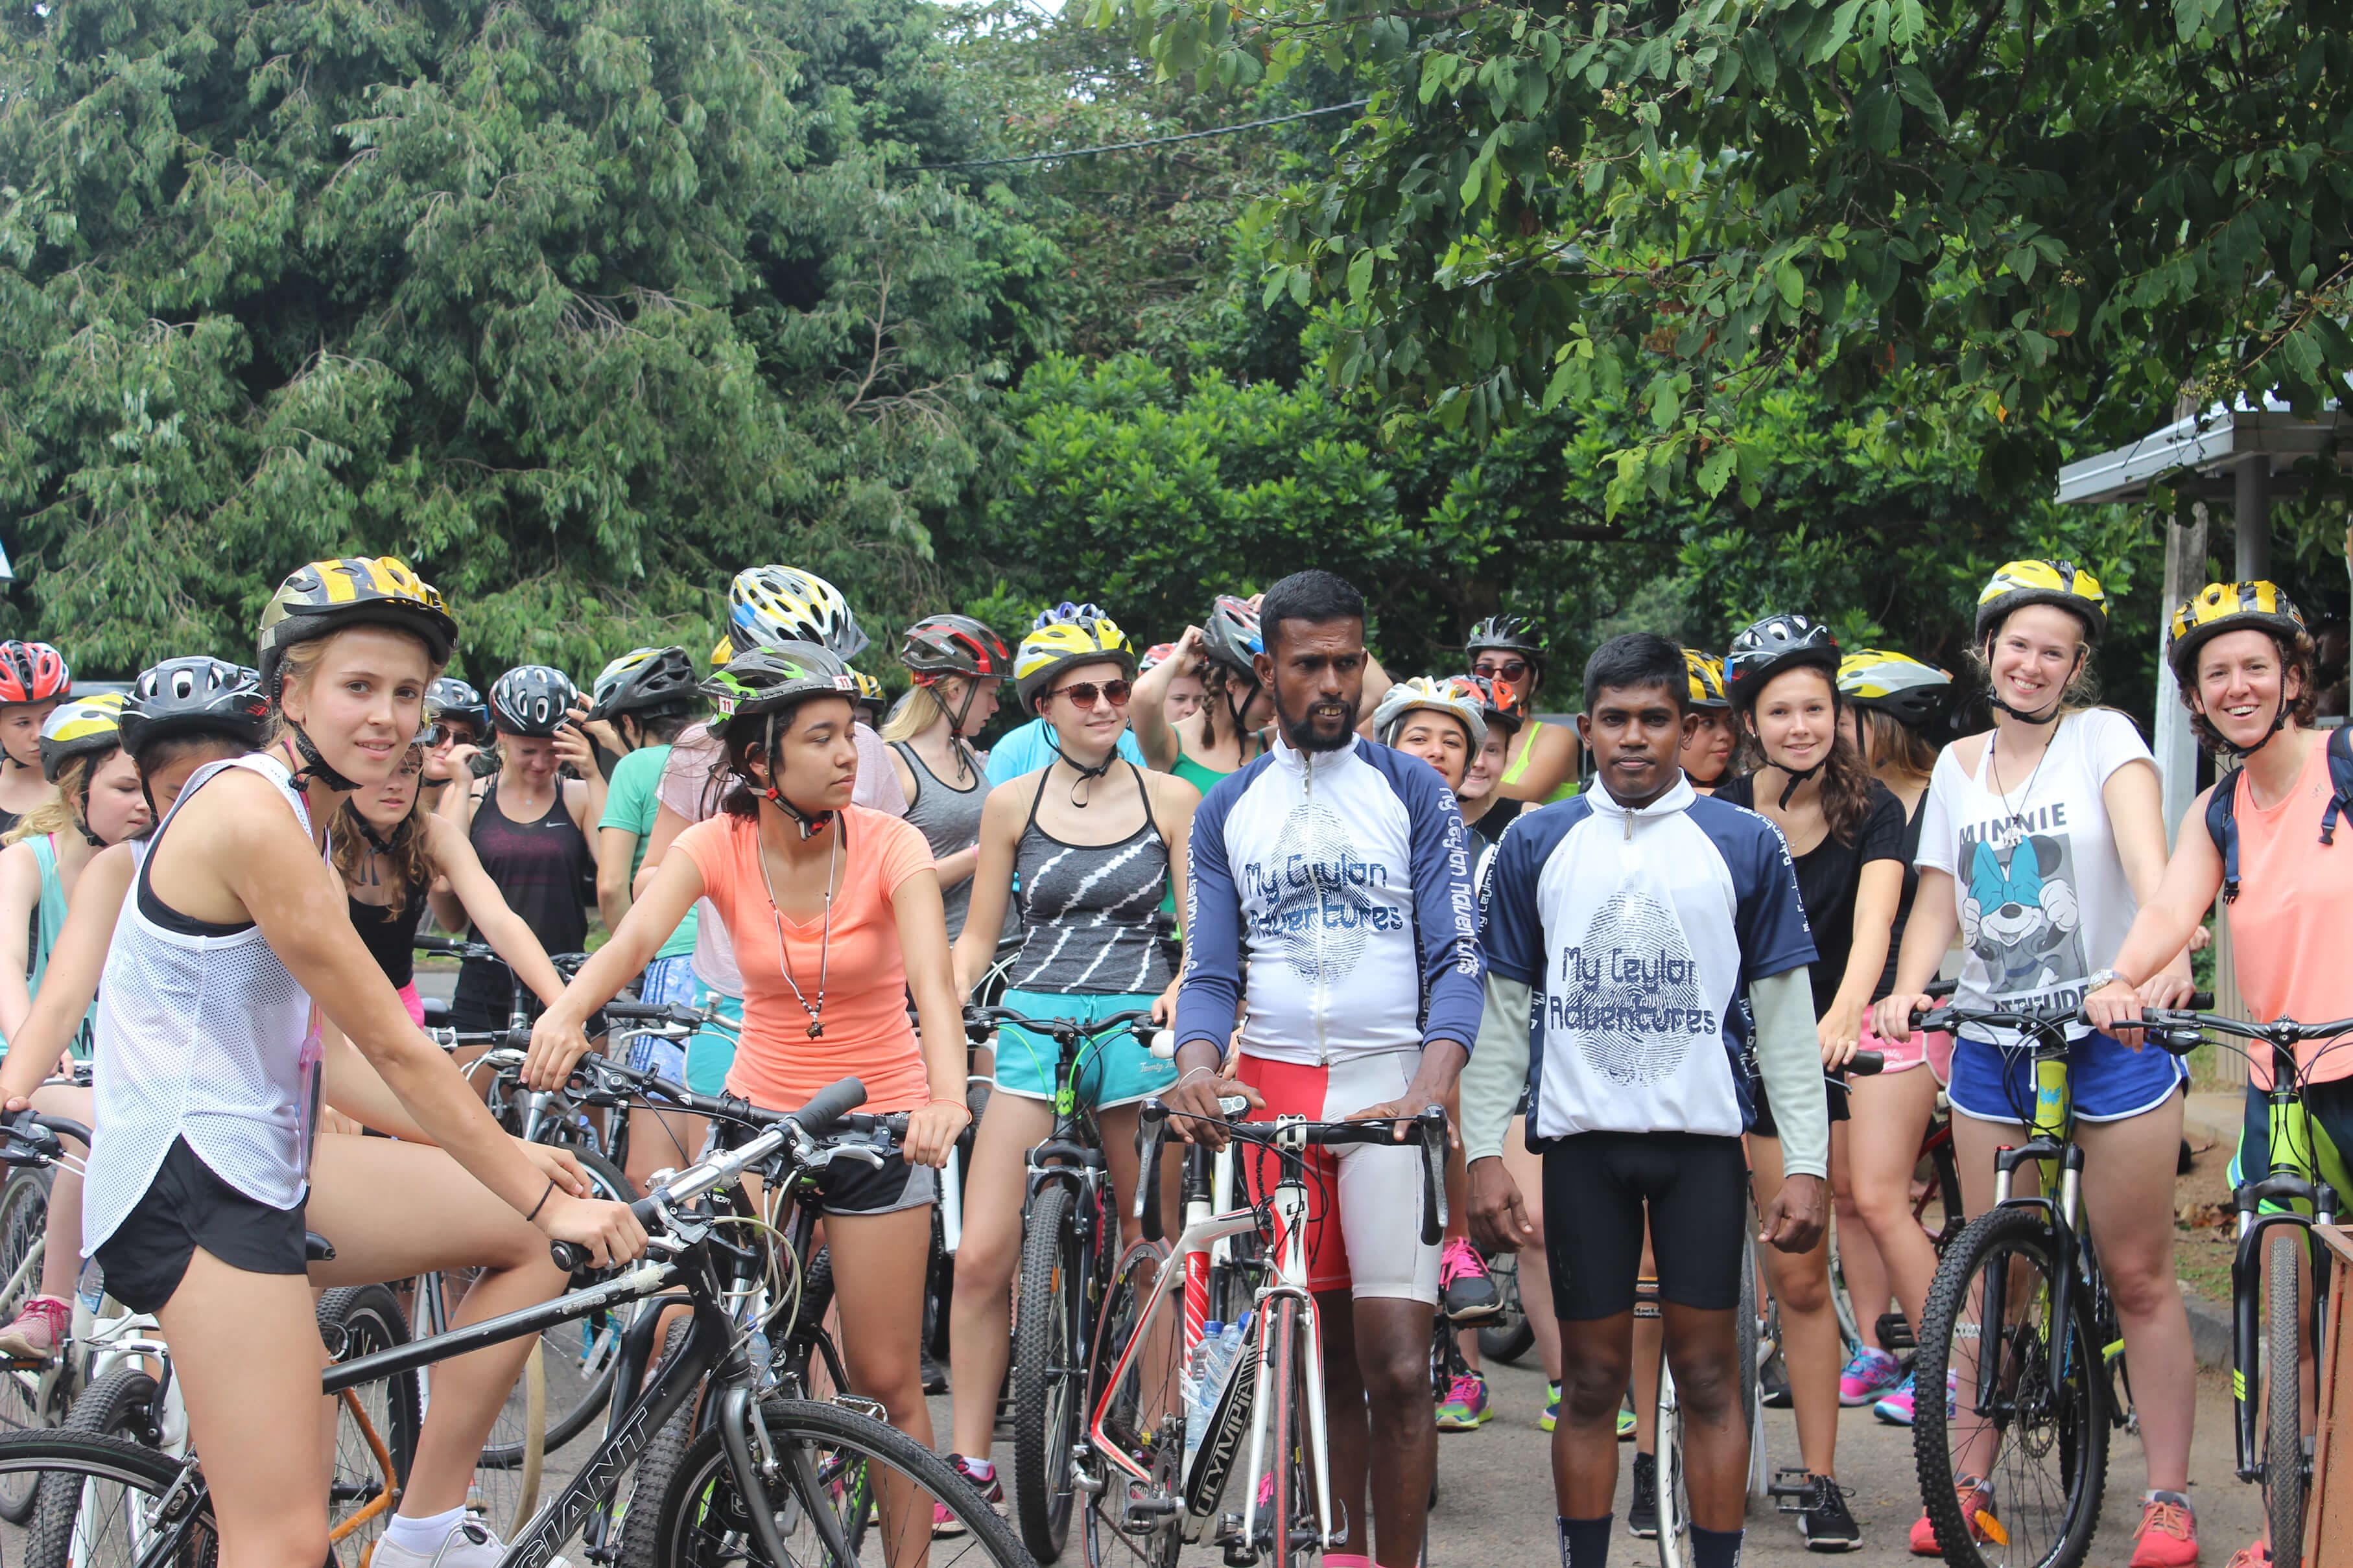 A group of tourists getting ready to start the cycle tour in countryside Colombo, Sri Lanka.